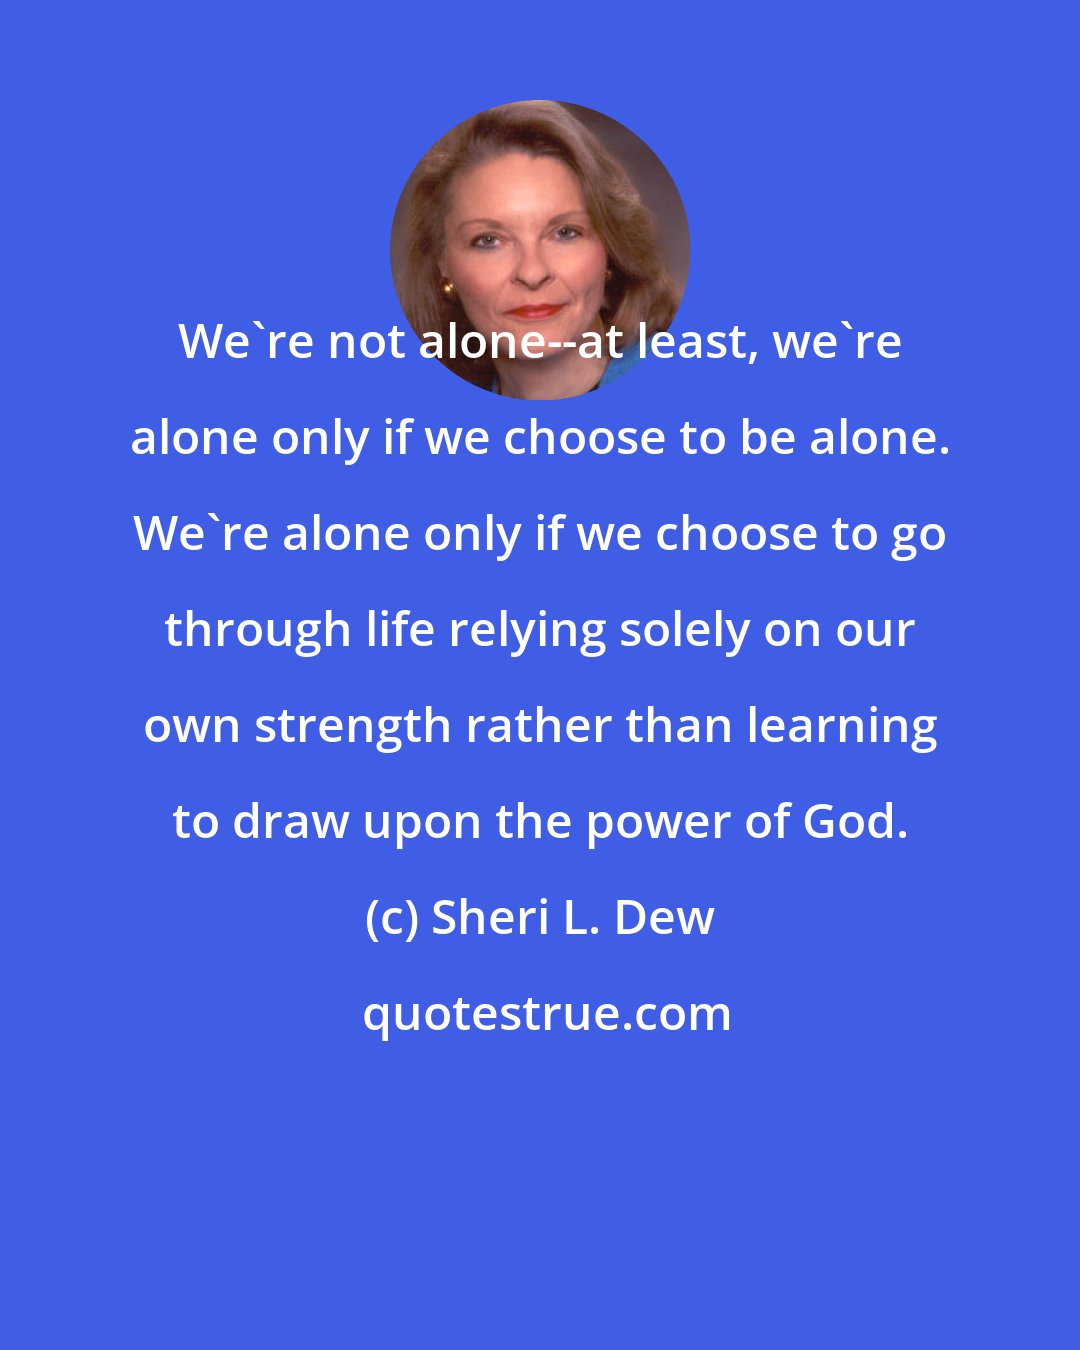 Sheri L. Dew: We're not alone--at least, we're alone only if we choose to be alone. We're alone only if we choose to go through life relying solely on our own strength rather than learning to draw upon the power of God.